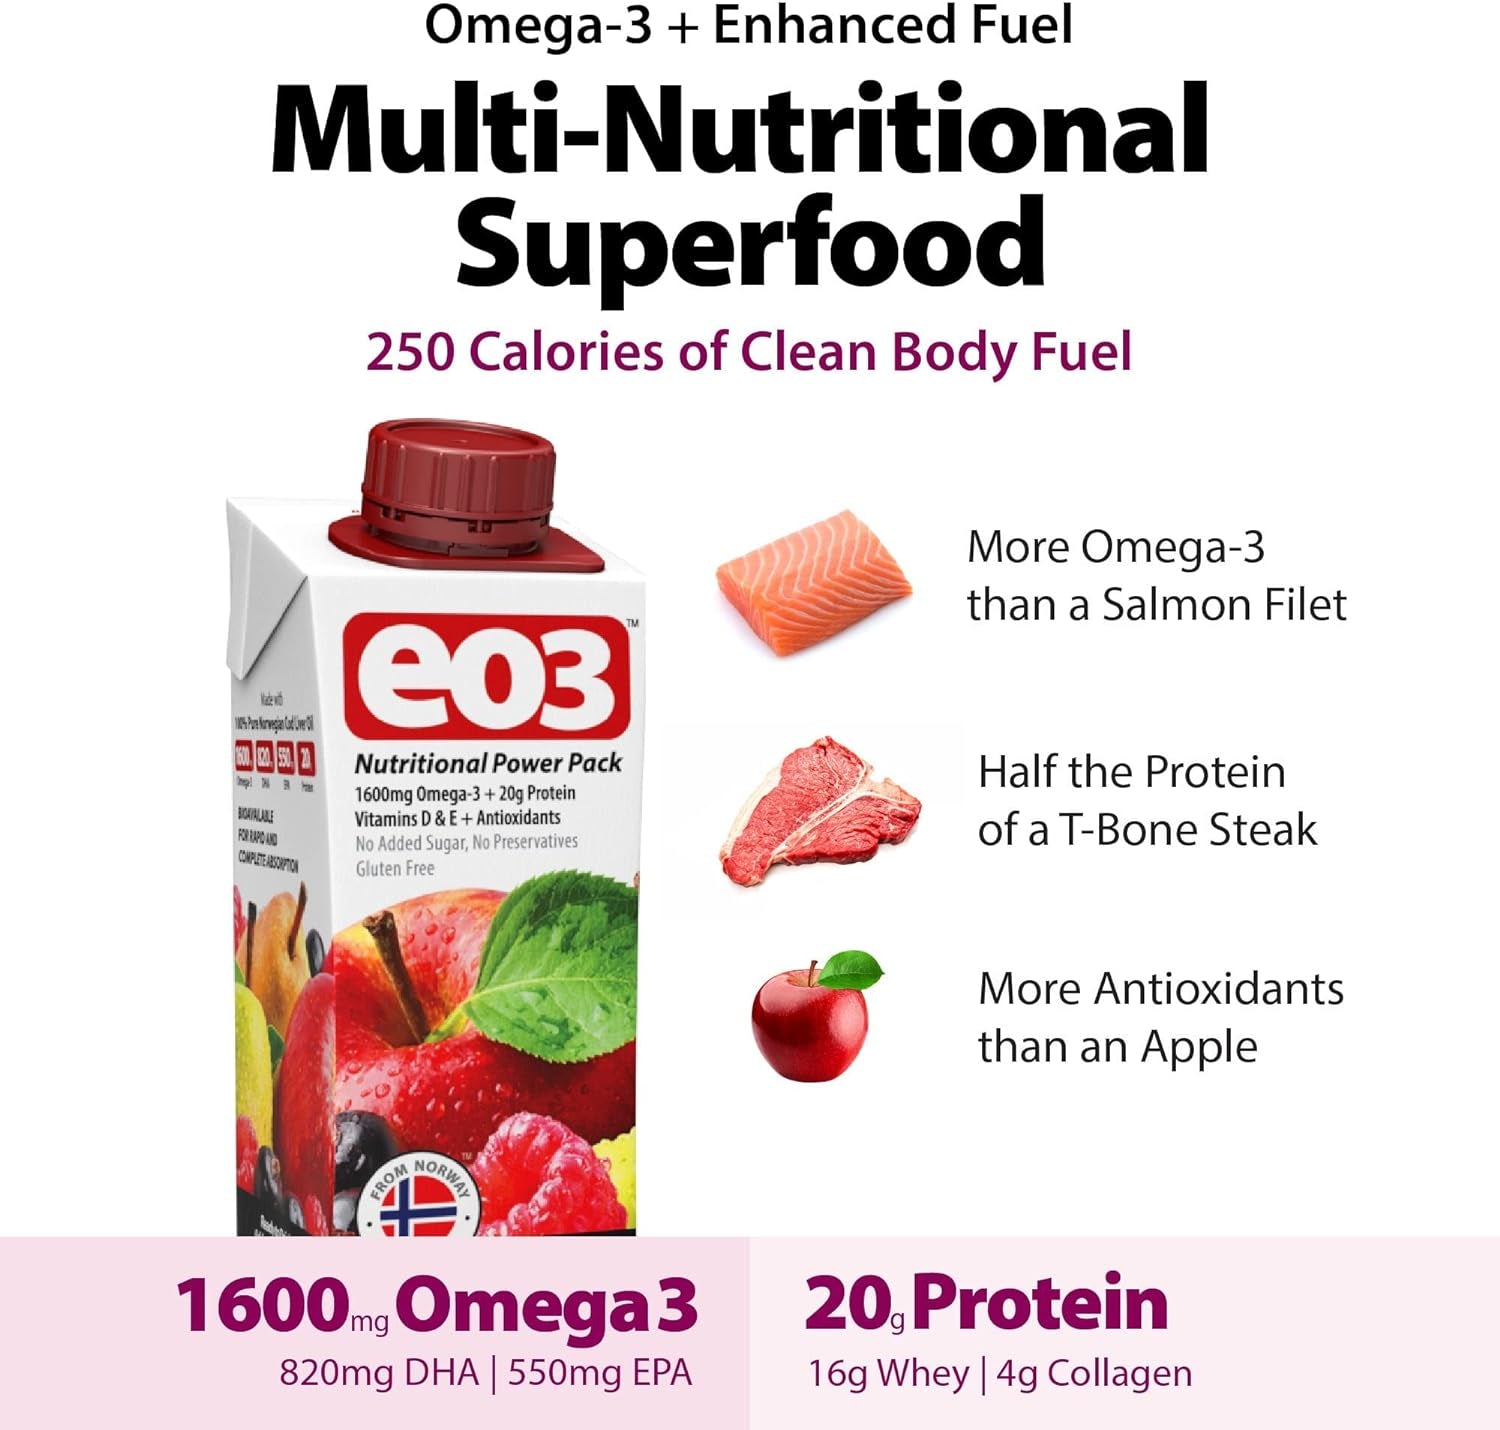 Omega-3 Multi-Nutritional Fruit Smoothie | 100% Cod Liver Oil | Whey Protein, Vitamins, Antioxidants| Gluten Free, No Added Sugar, No Preservatives | Ready-To-Drink | 6 Pack, 8.4 Fl Oz